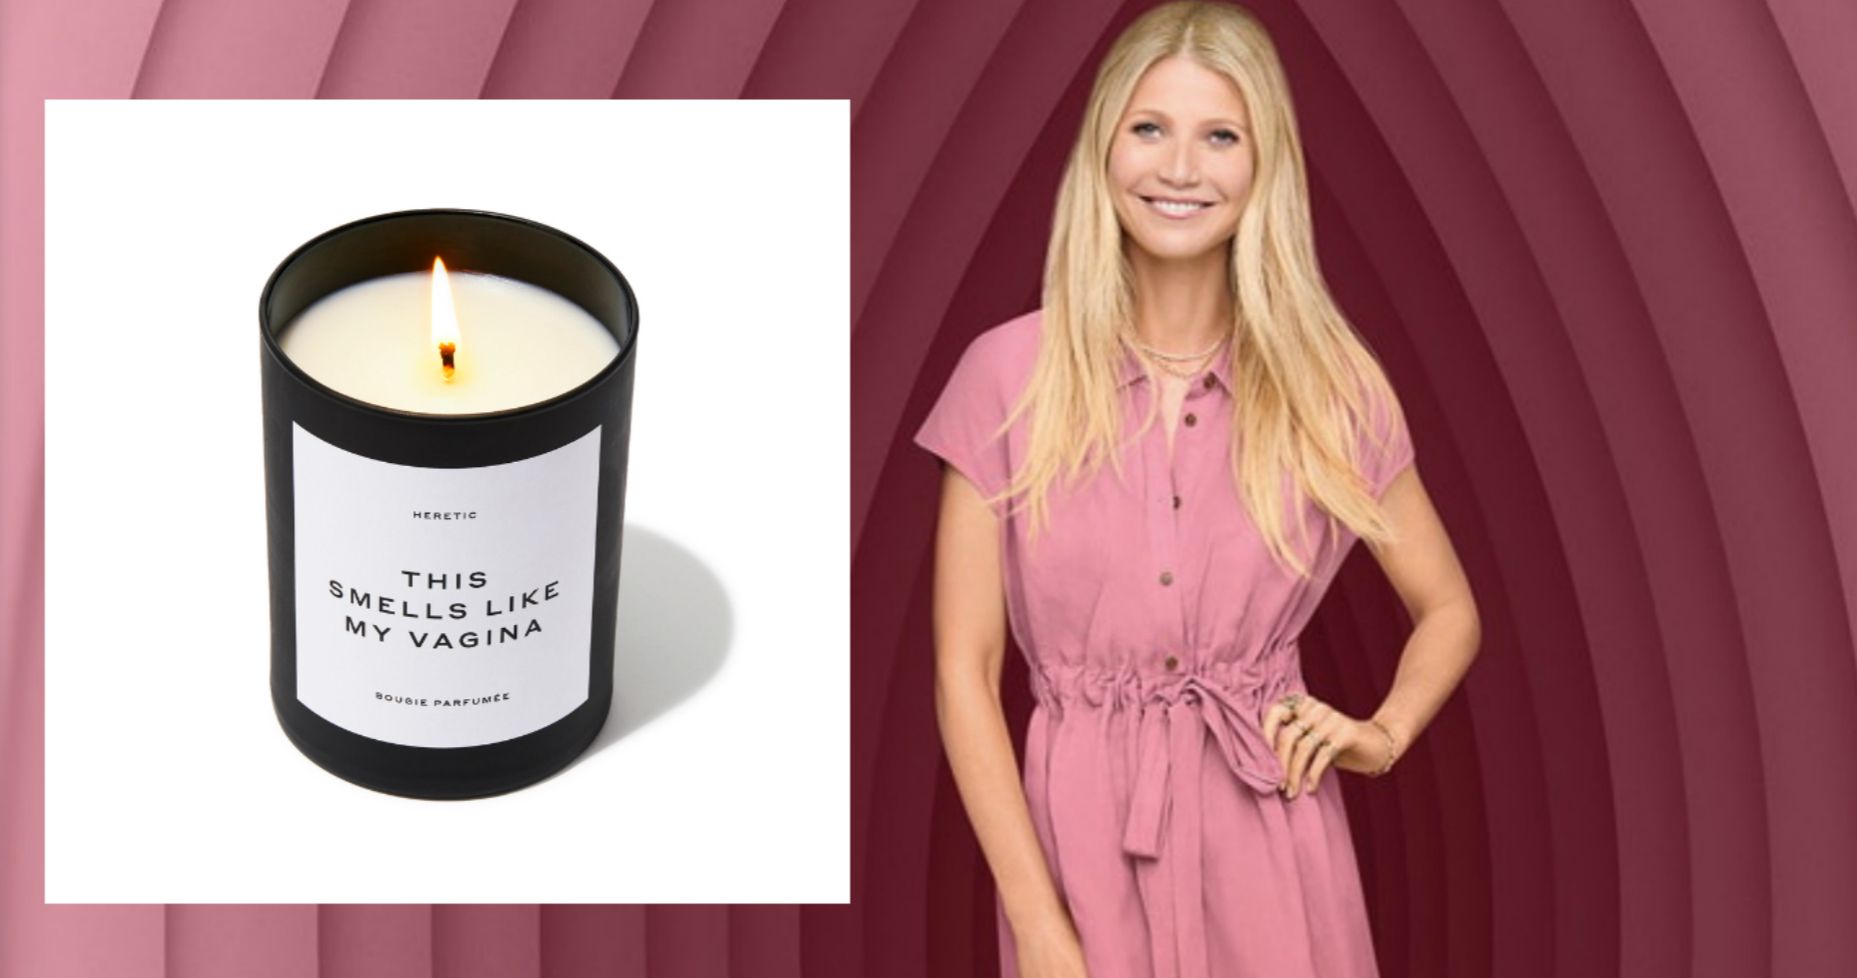 Gwyneth Paltrow Reveals Her Vagina-Scented Goop Candle and It Sells Out Immediately